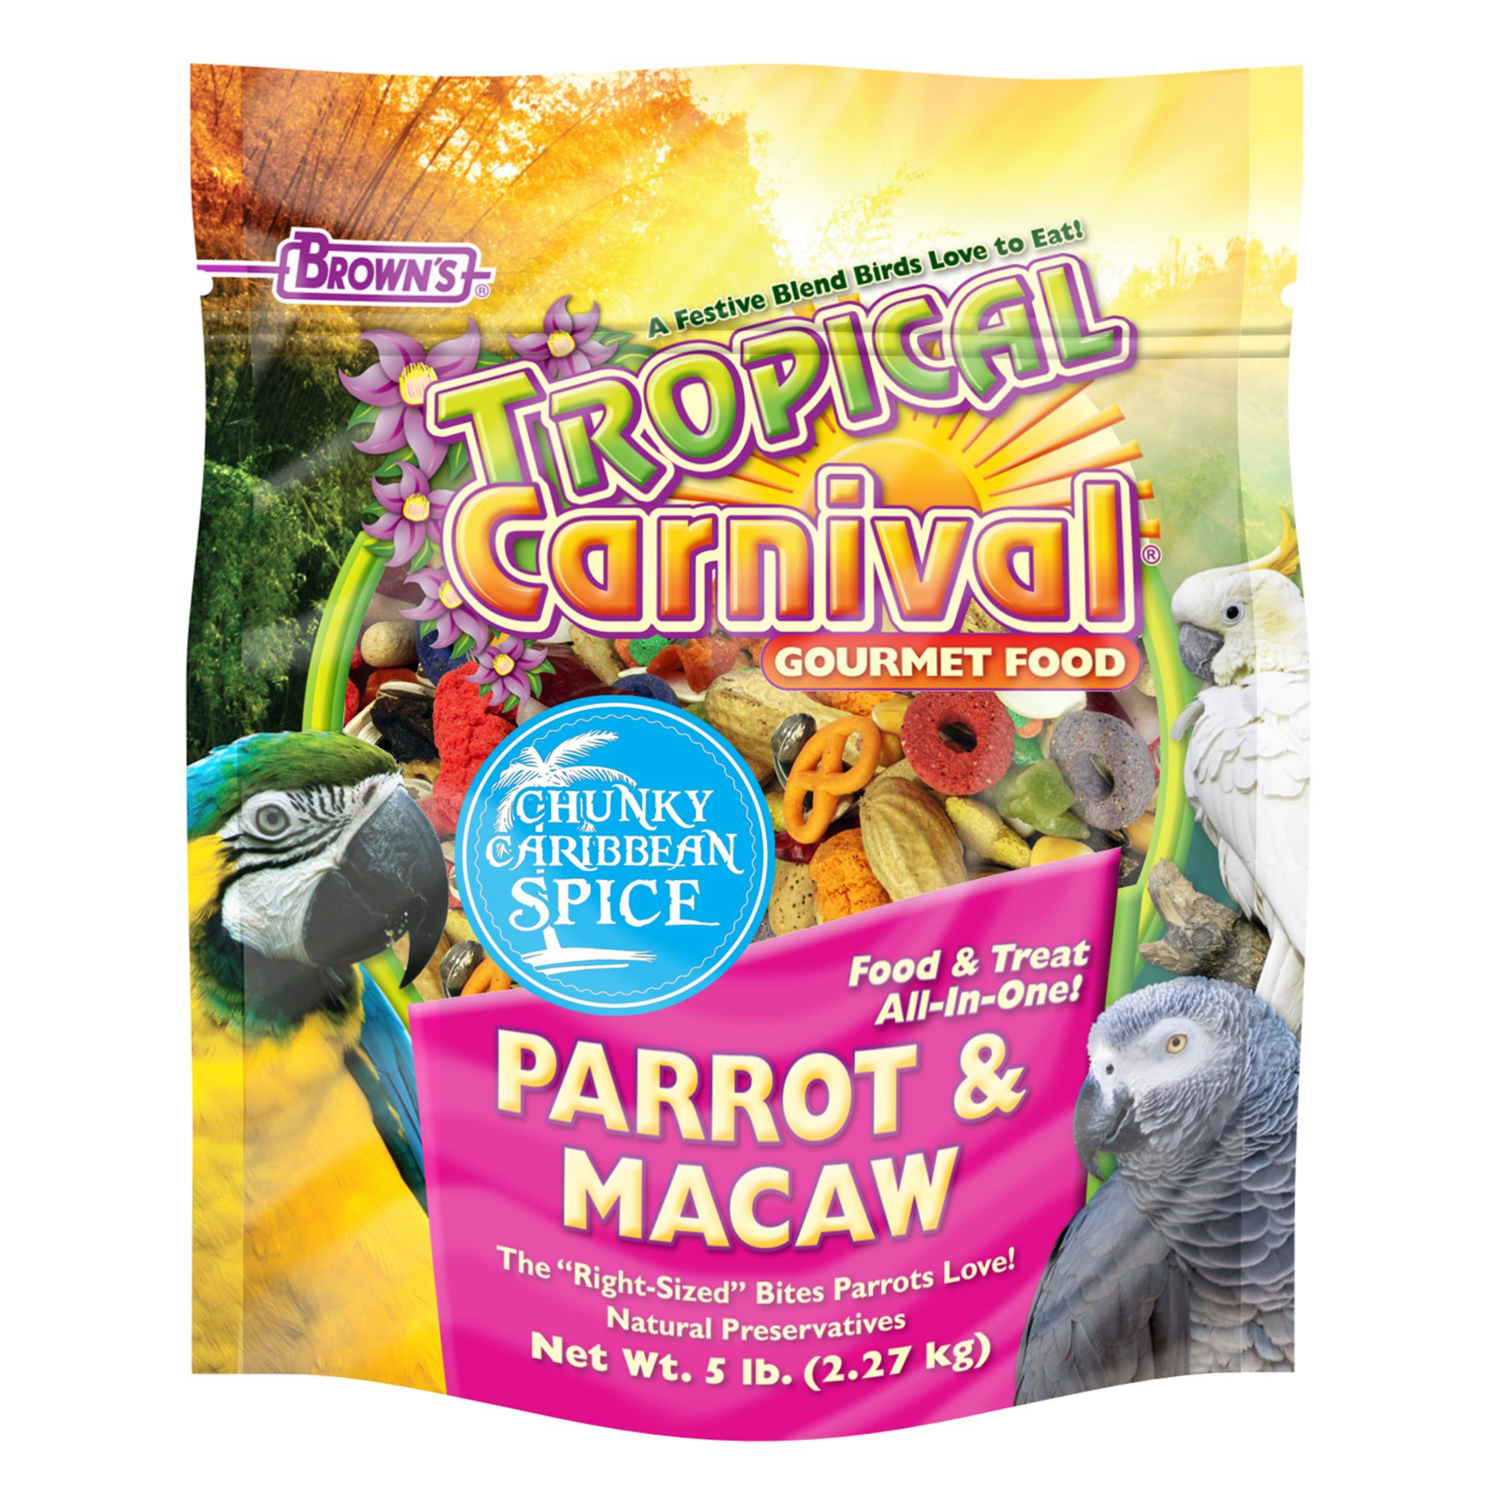 BROWNS TROPICAL CARNIVAL PARROT/MACAW